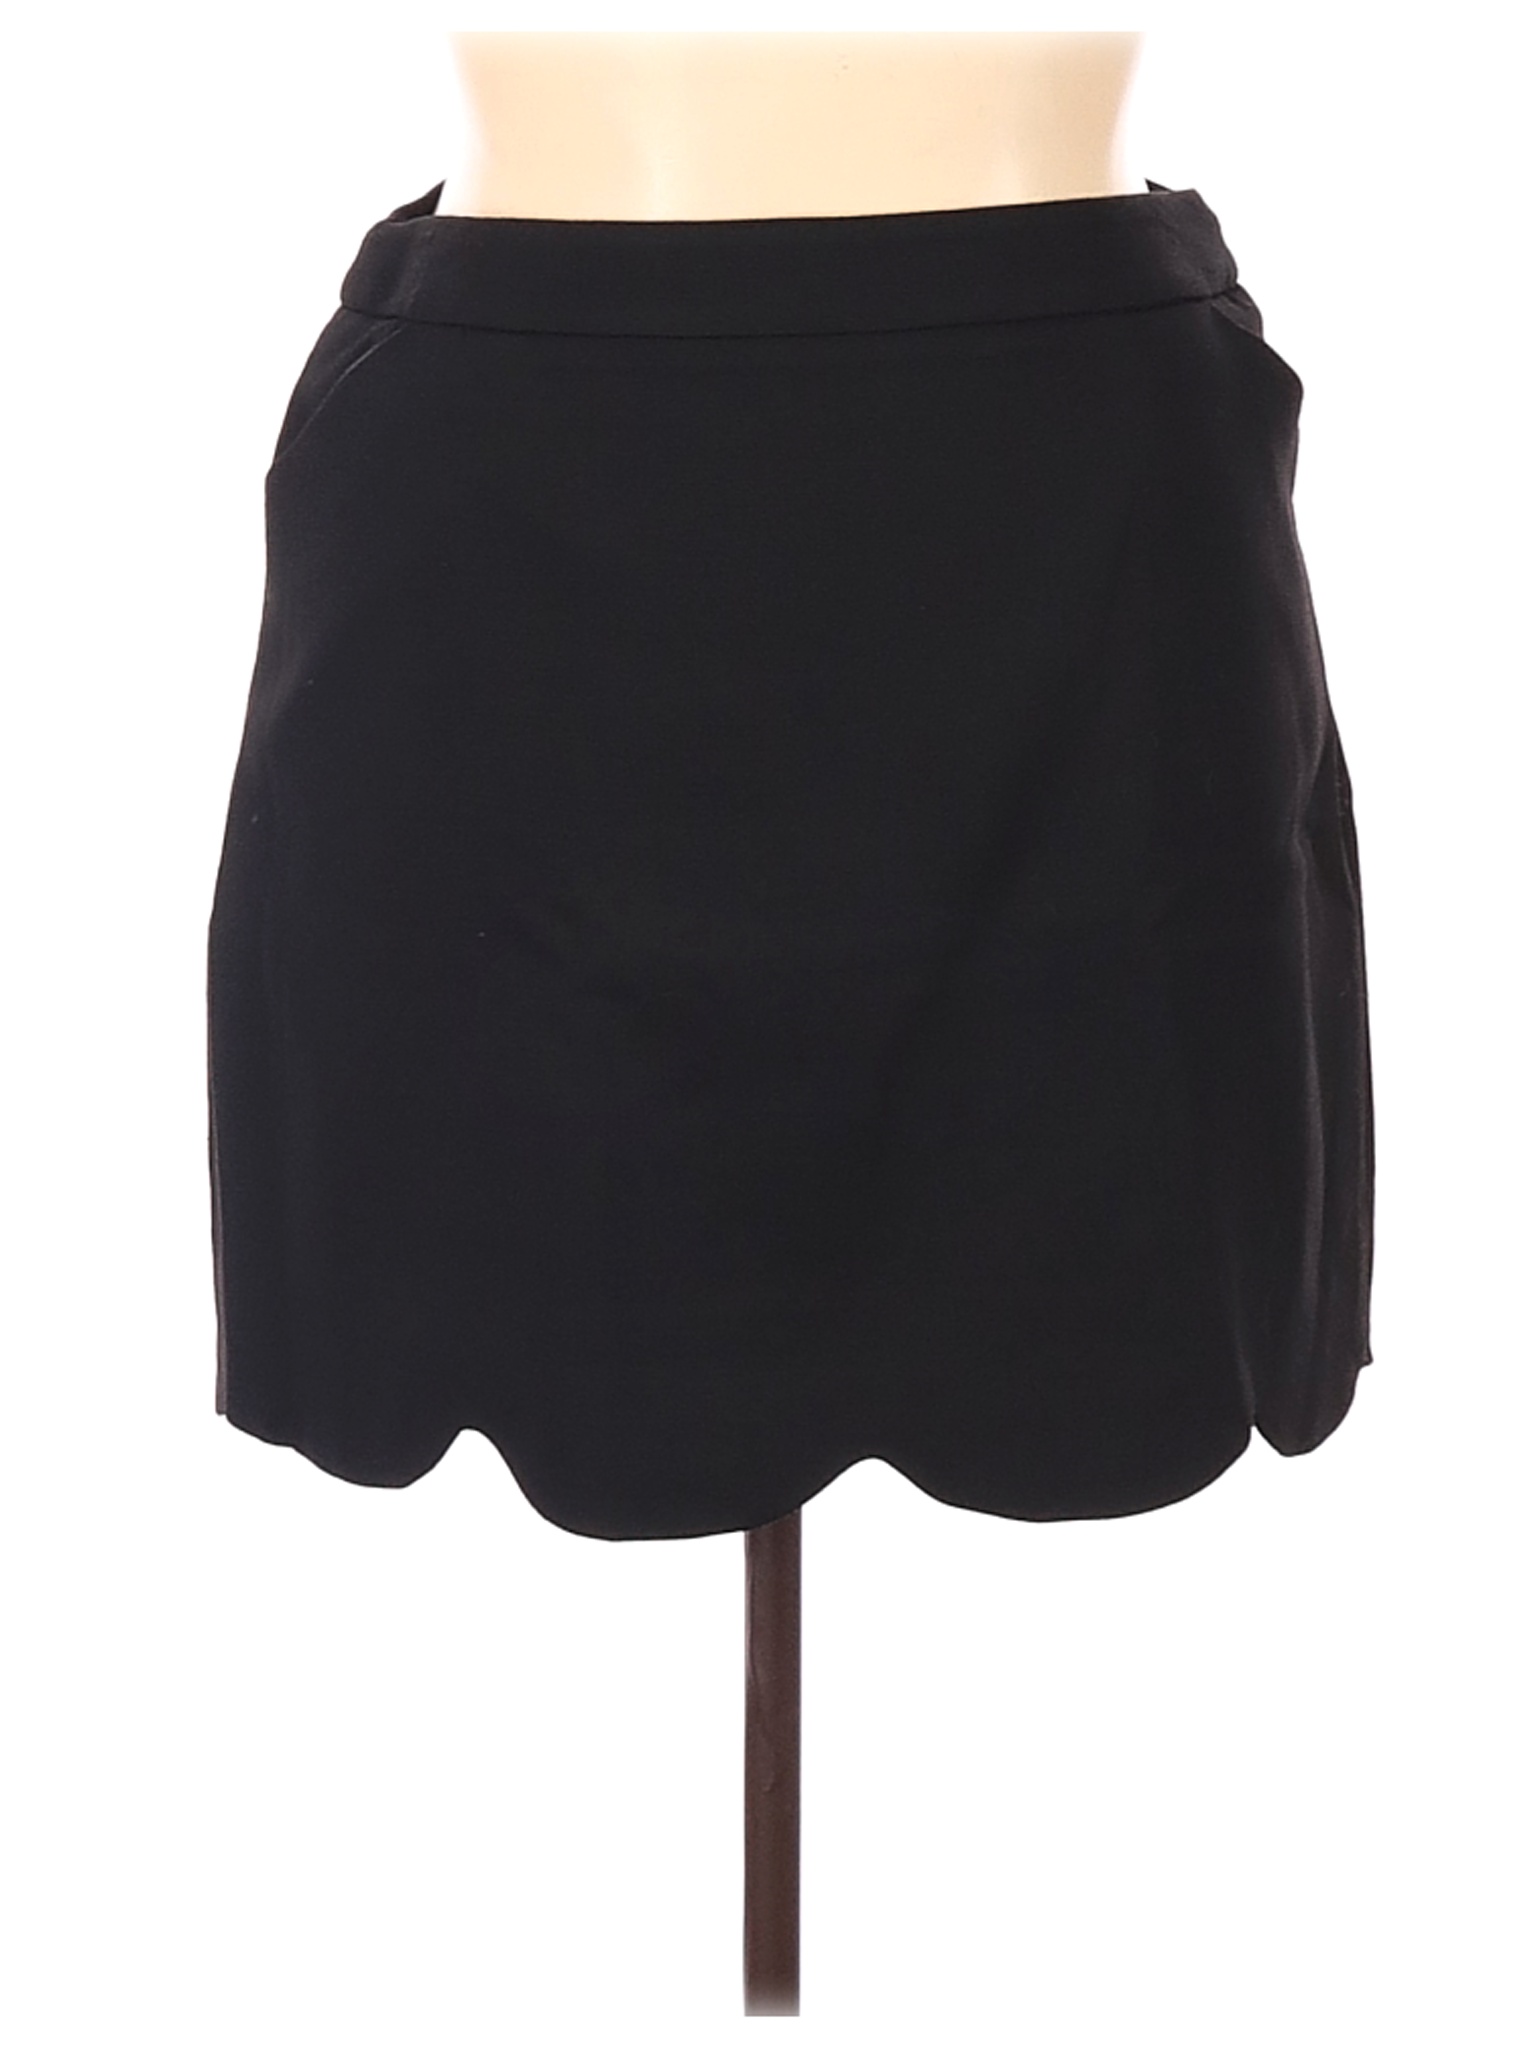 Boutique by Jaeger Women Black Casual Skirt 14 | eBay